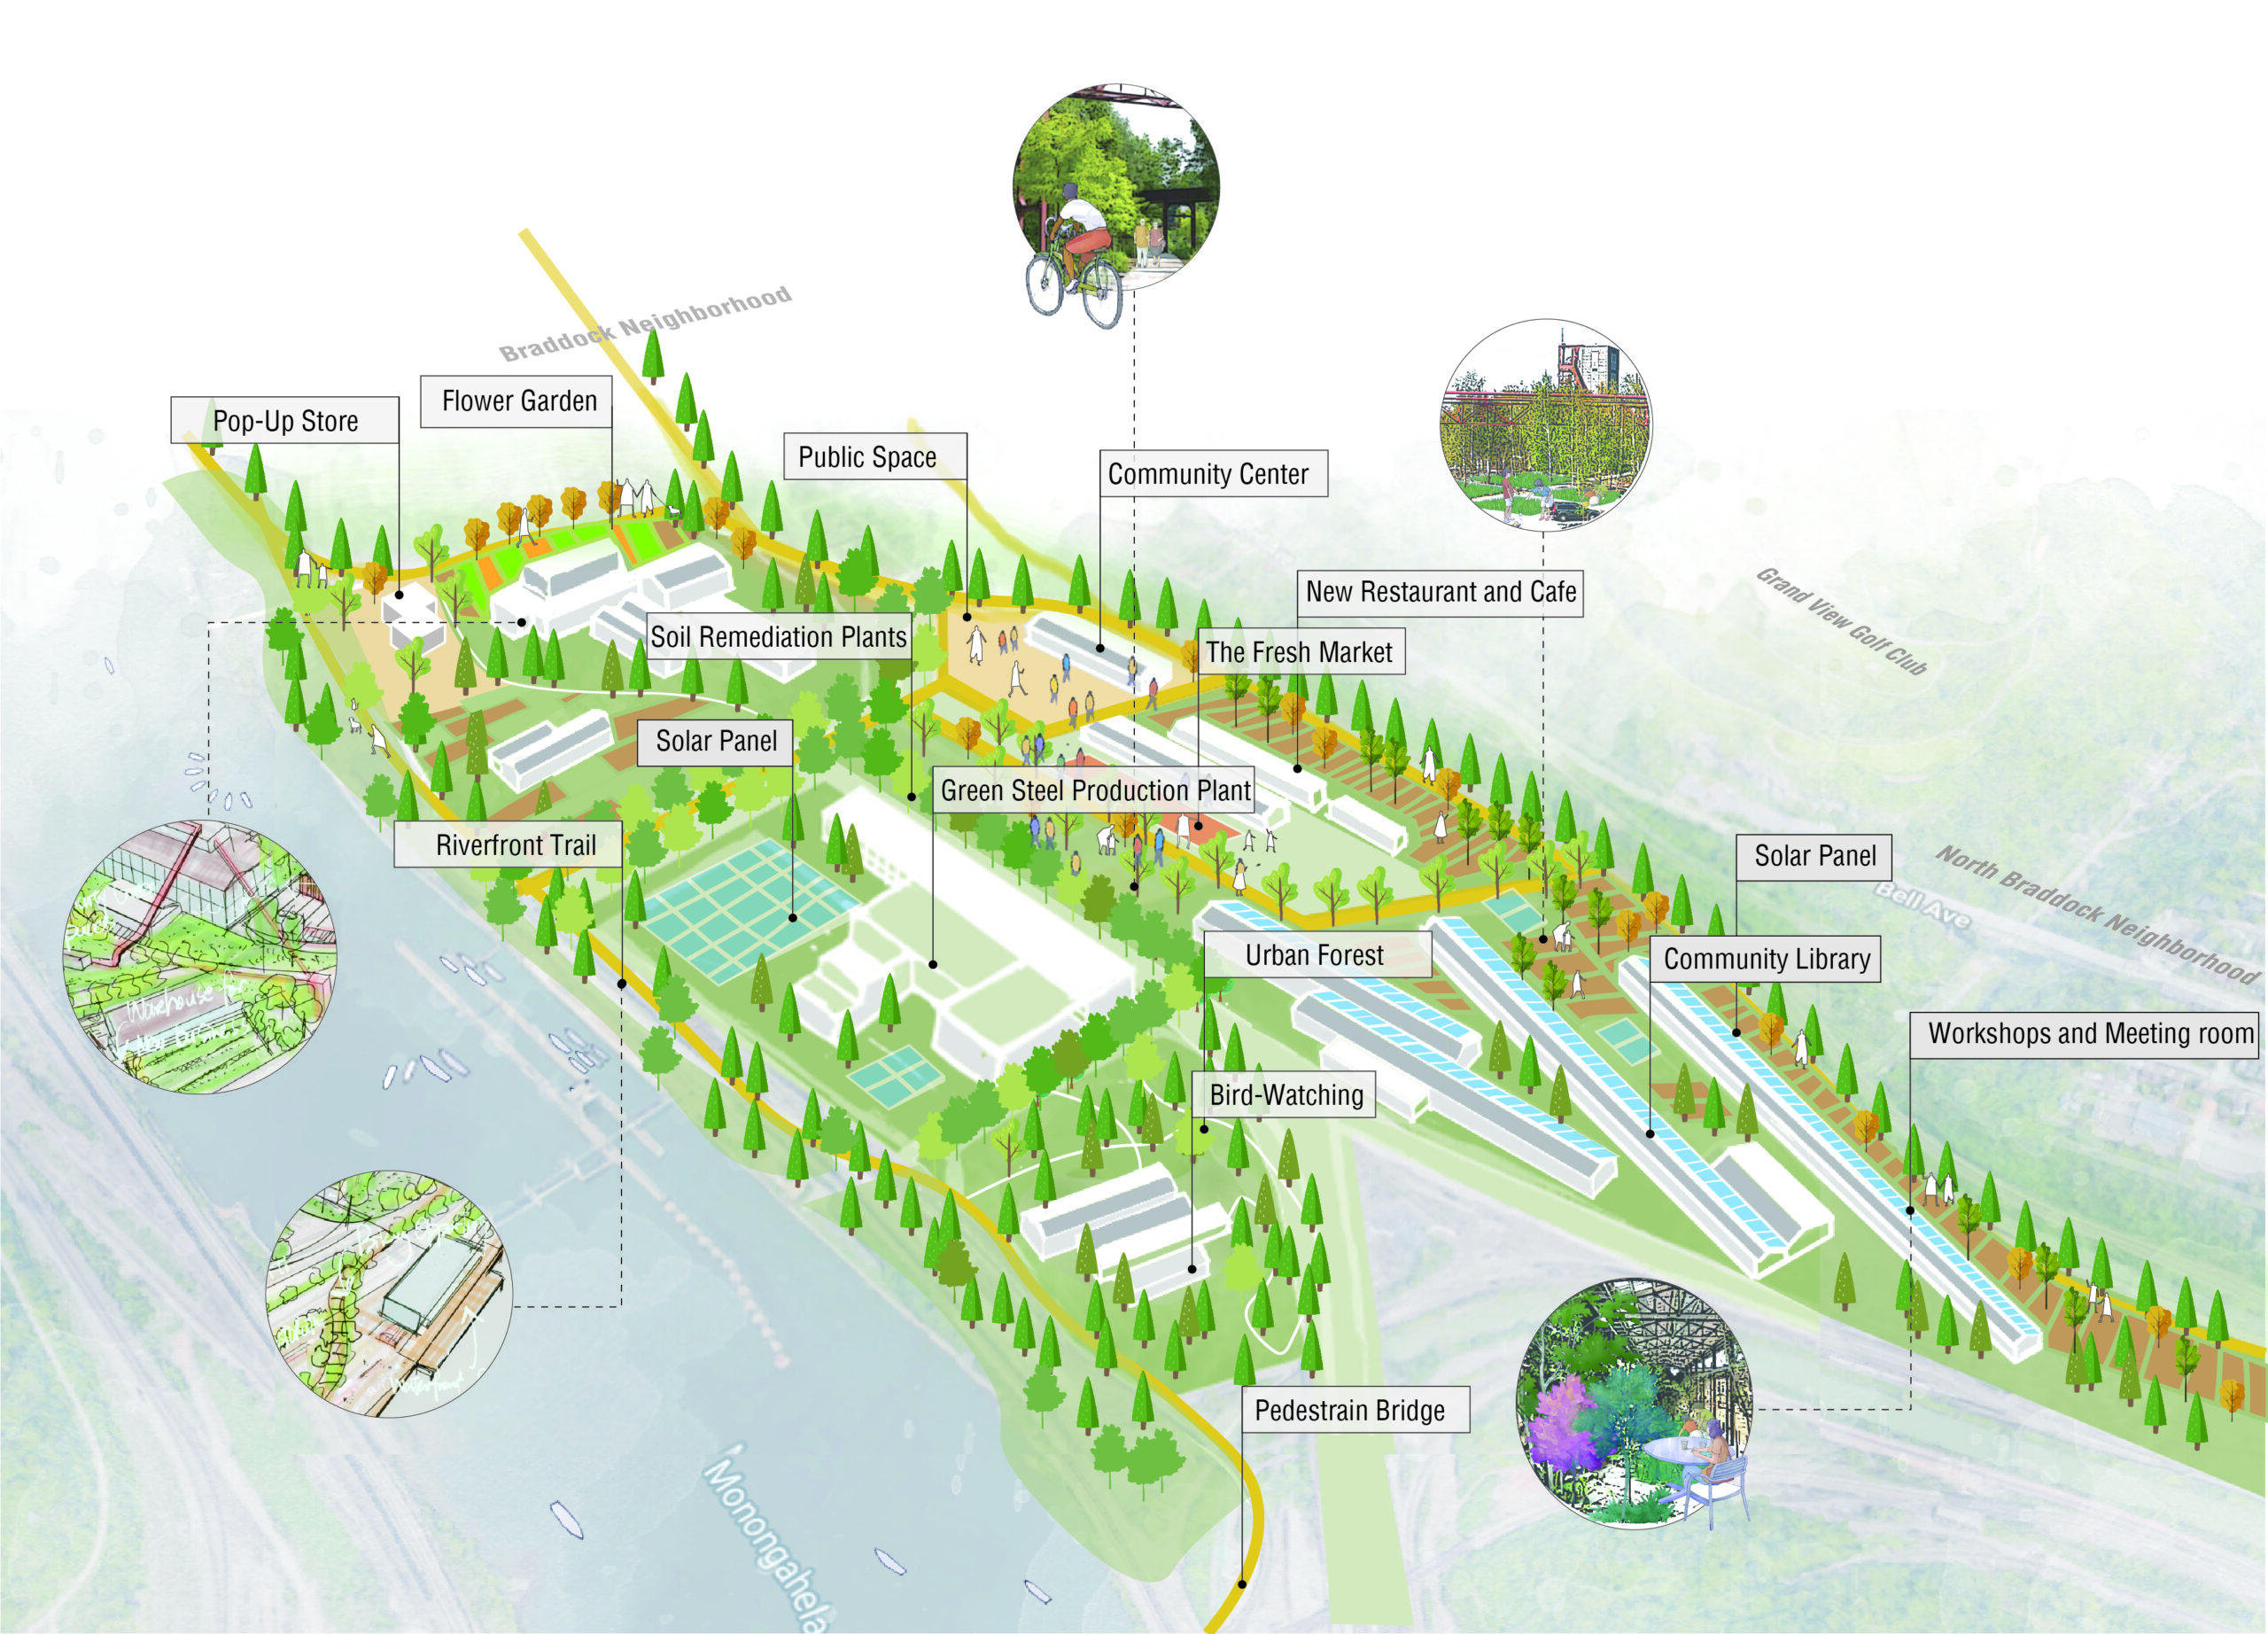 Aerial perspective diagram showing long term proposal with public spaces, a fresh market, community library, soil remediation areas, flower garden, an urban forest and bird watching areas, riverfront trail, workshop areas, and the green steel production facility.